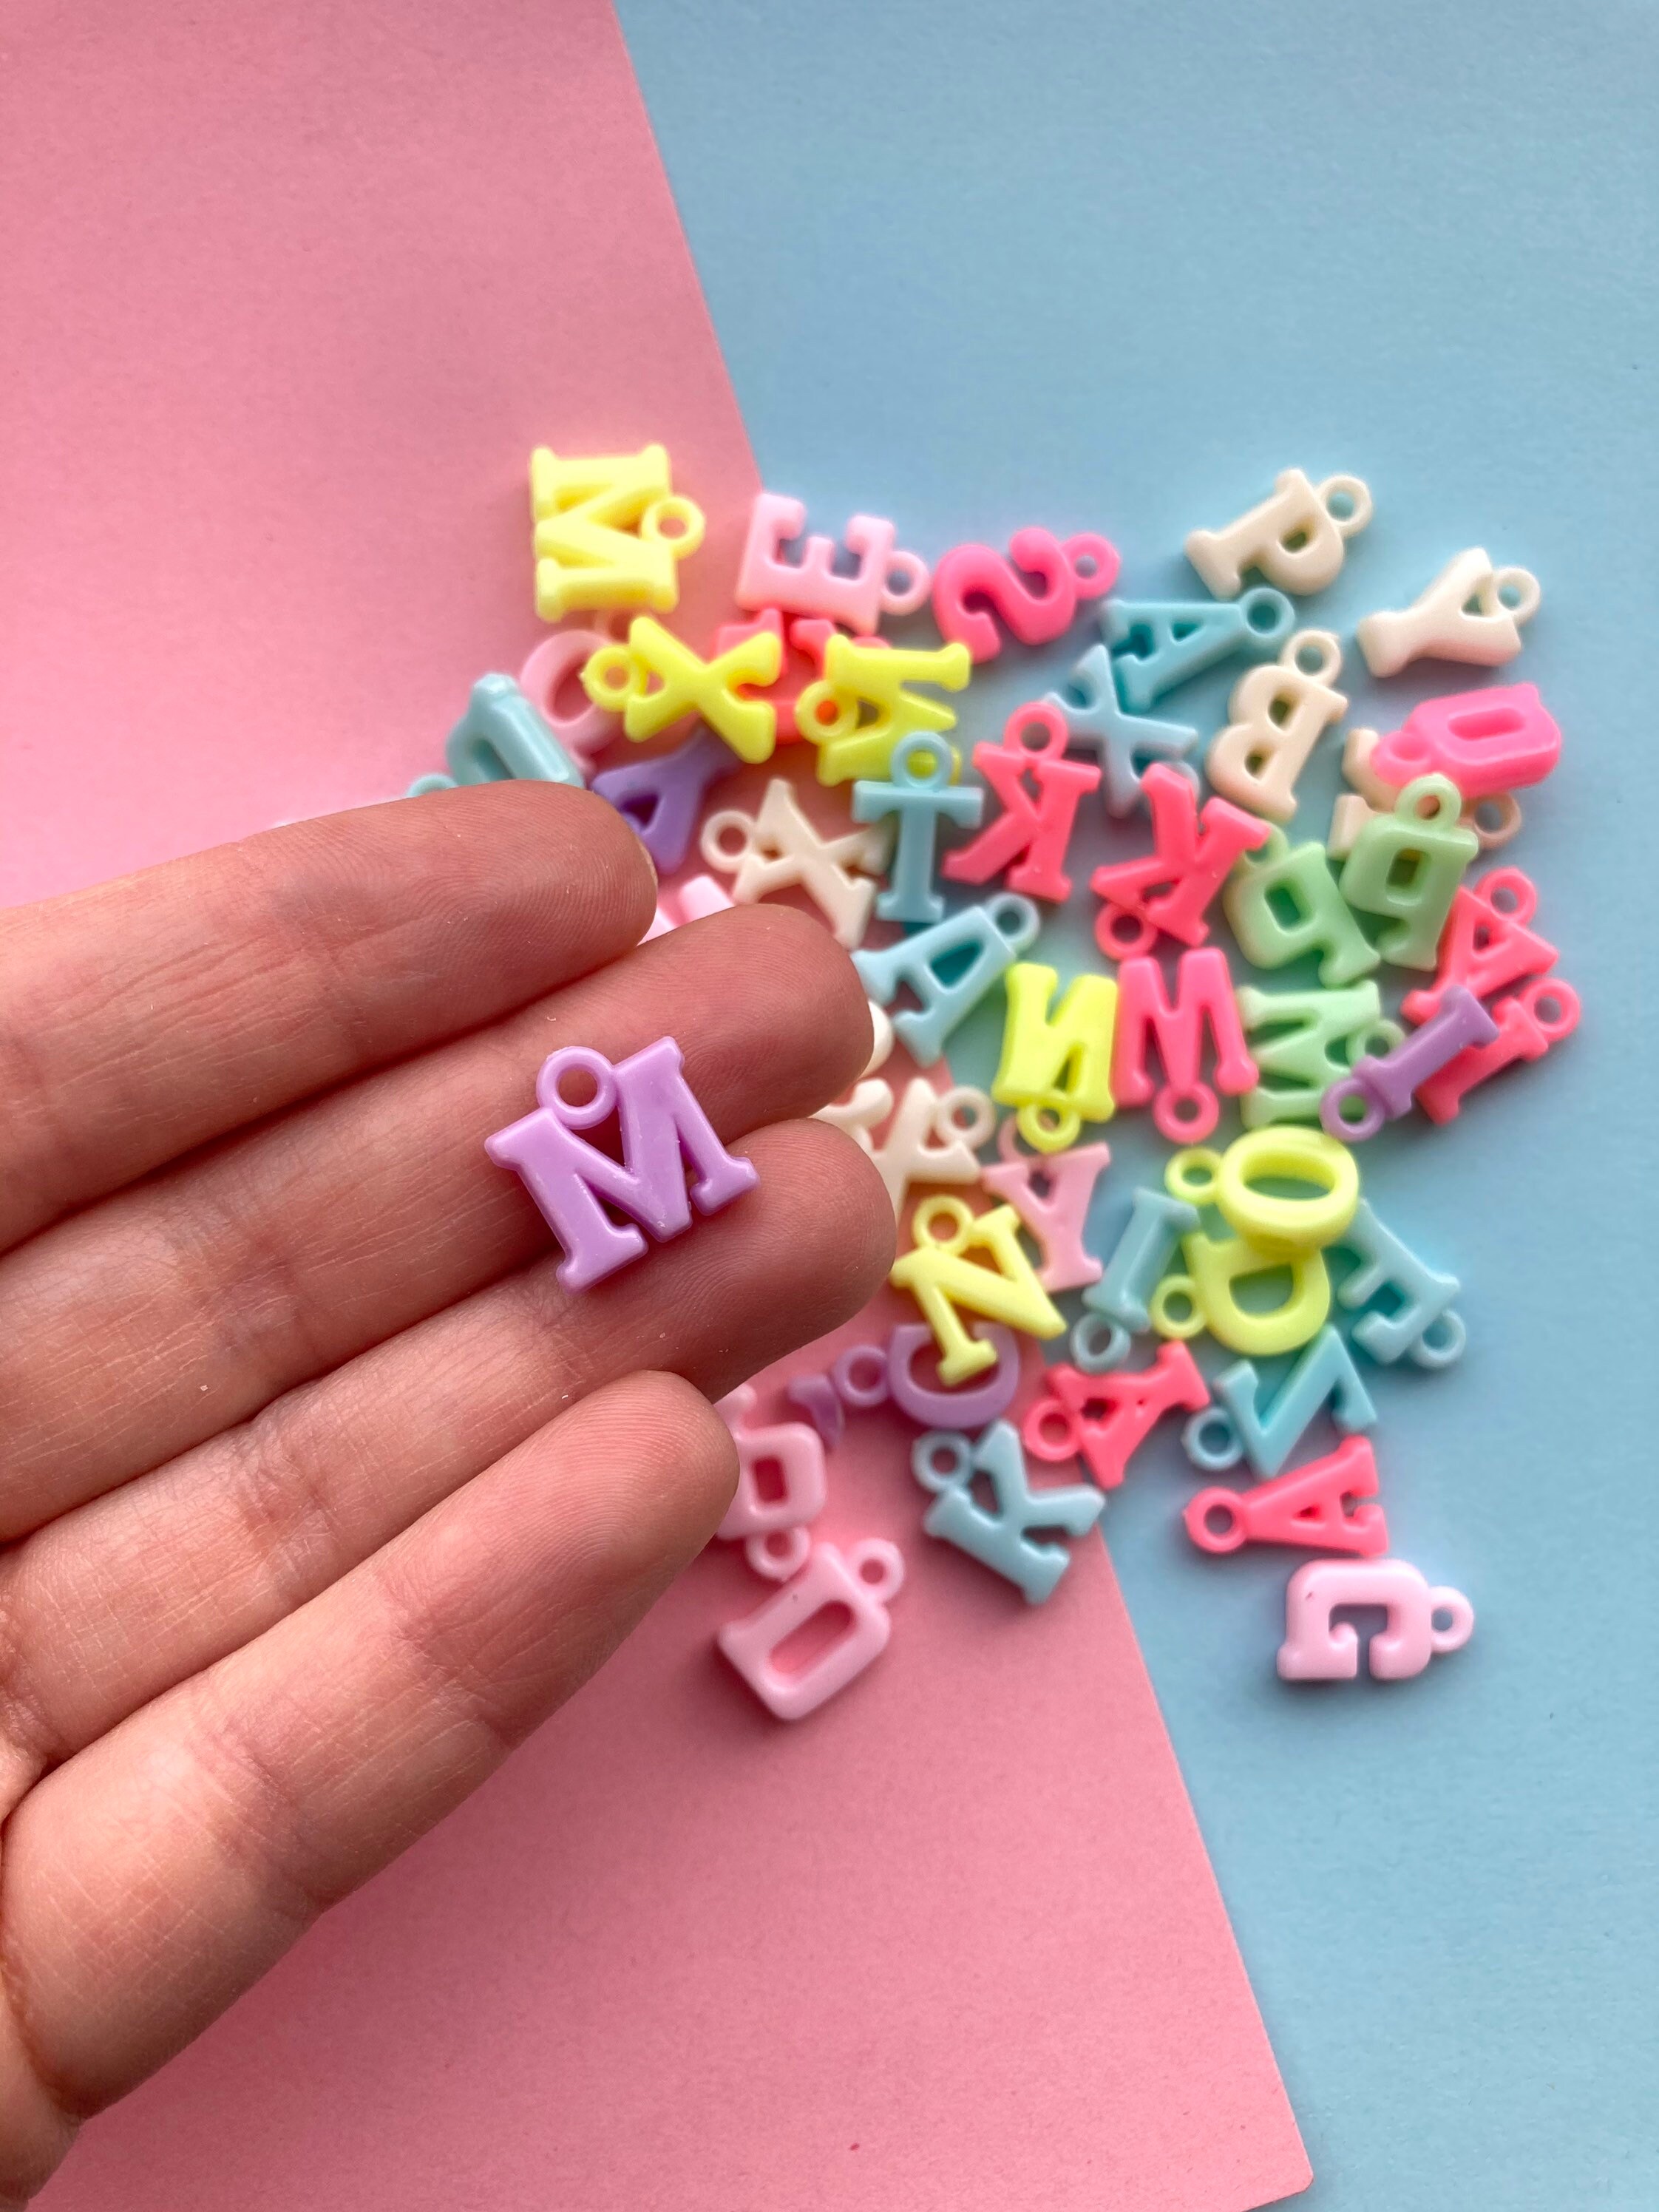 100Pcs Acrylic Letter A Alphabet Silicone Beads Vowel Letter Beads